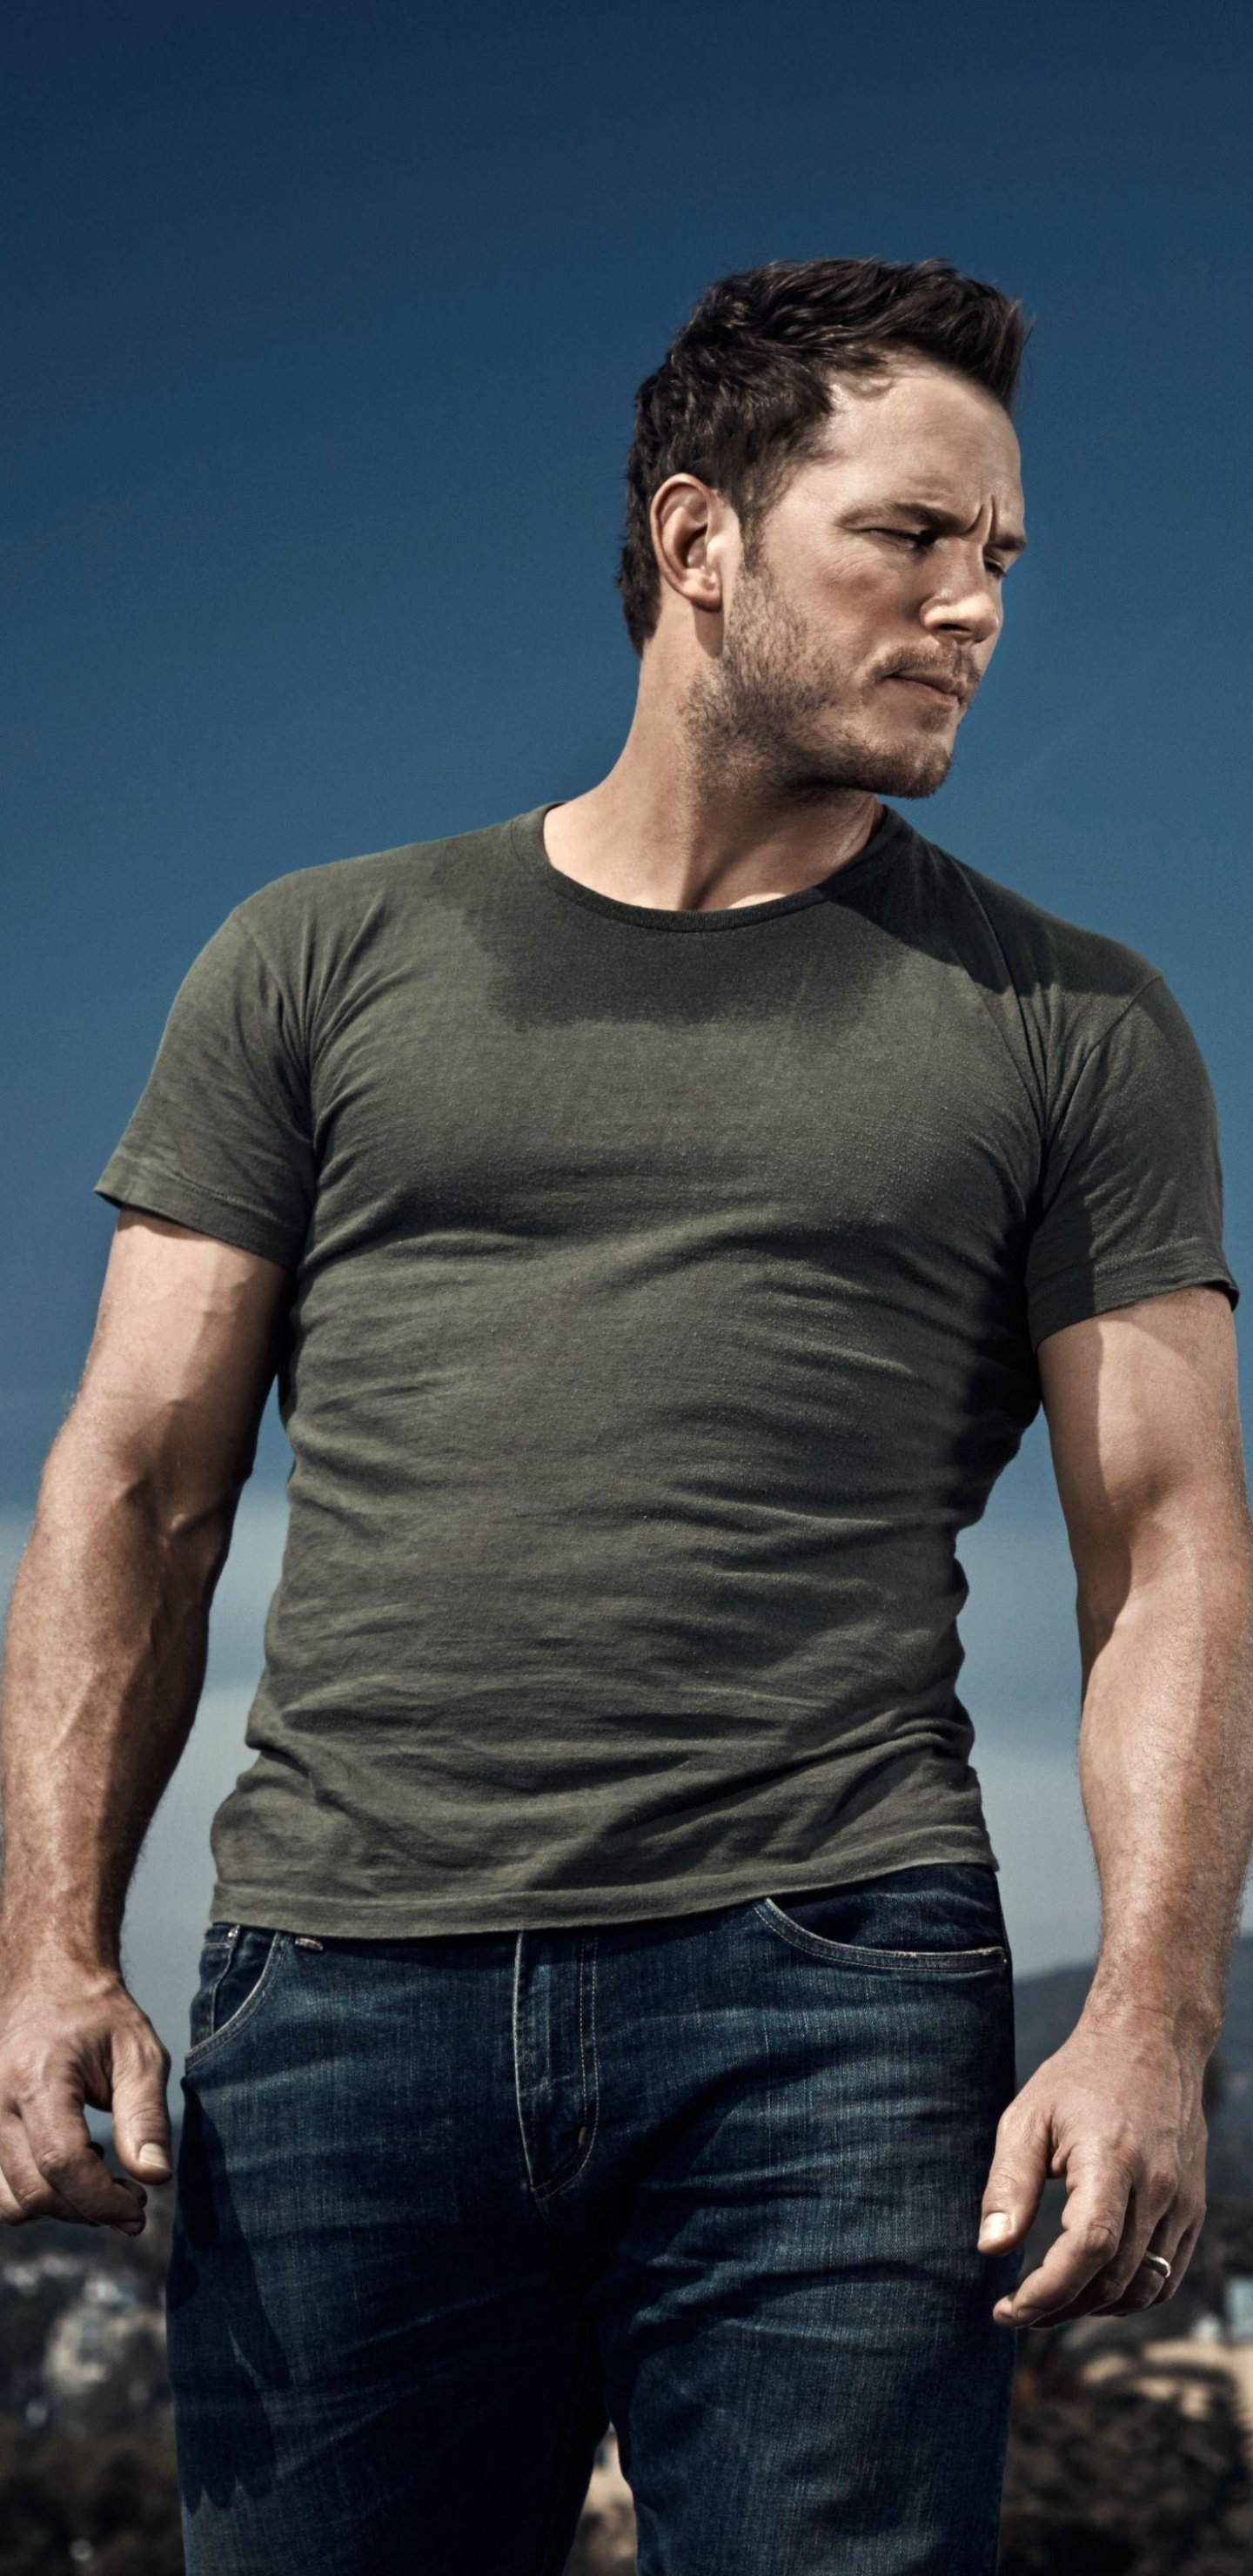 Chris Pratt: Celebrity, named by Time as one of the 100 most influential people in the world. 1440x2960 HD Wallpaper.